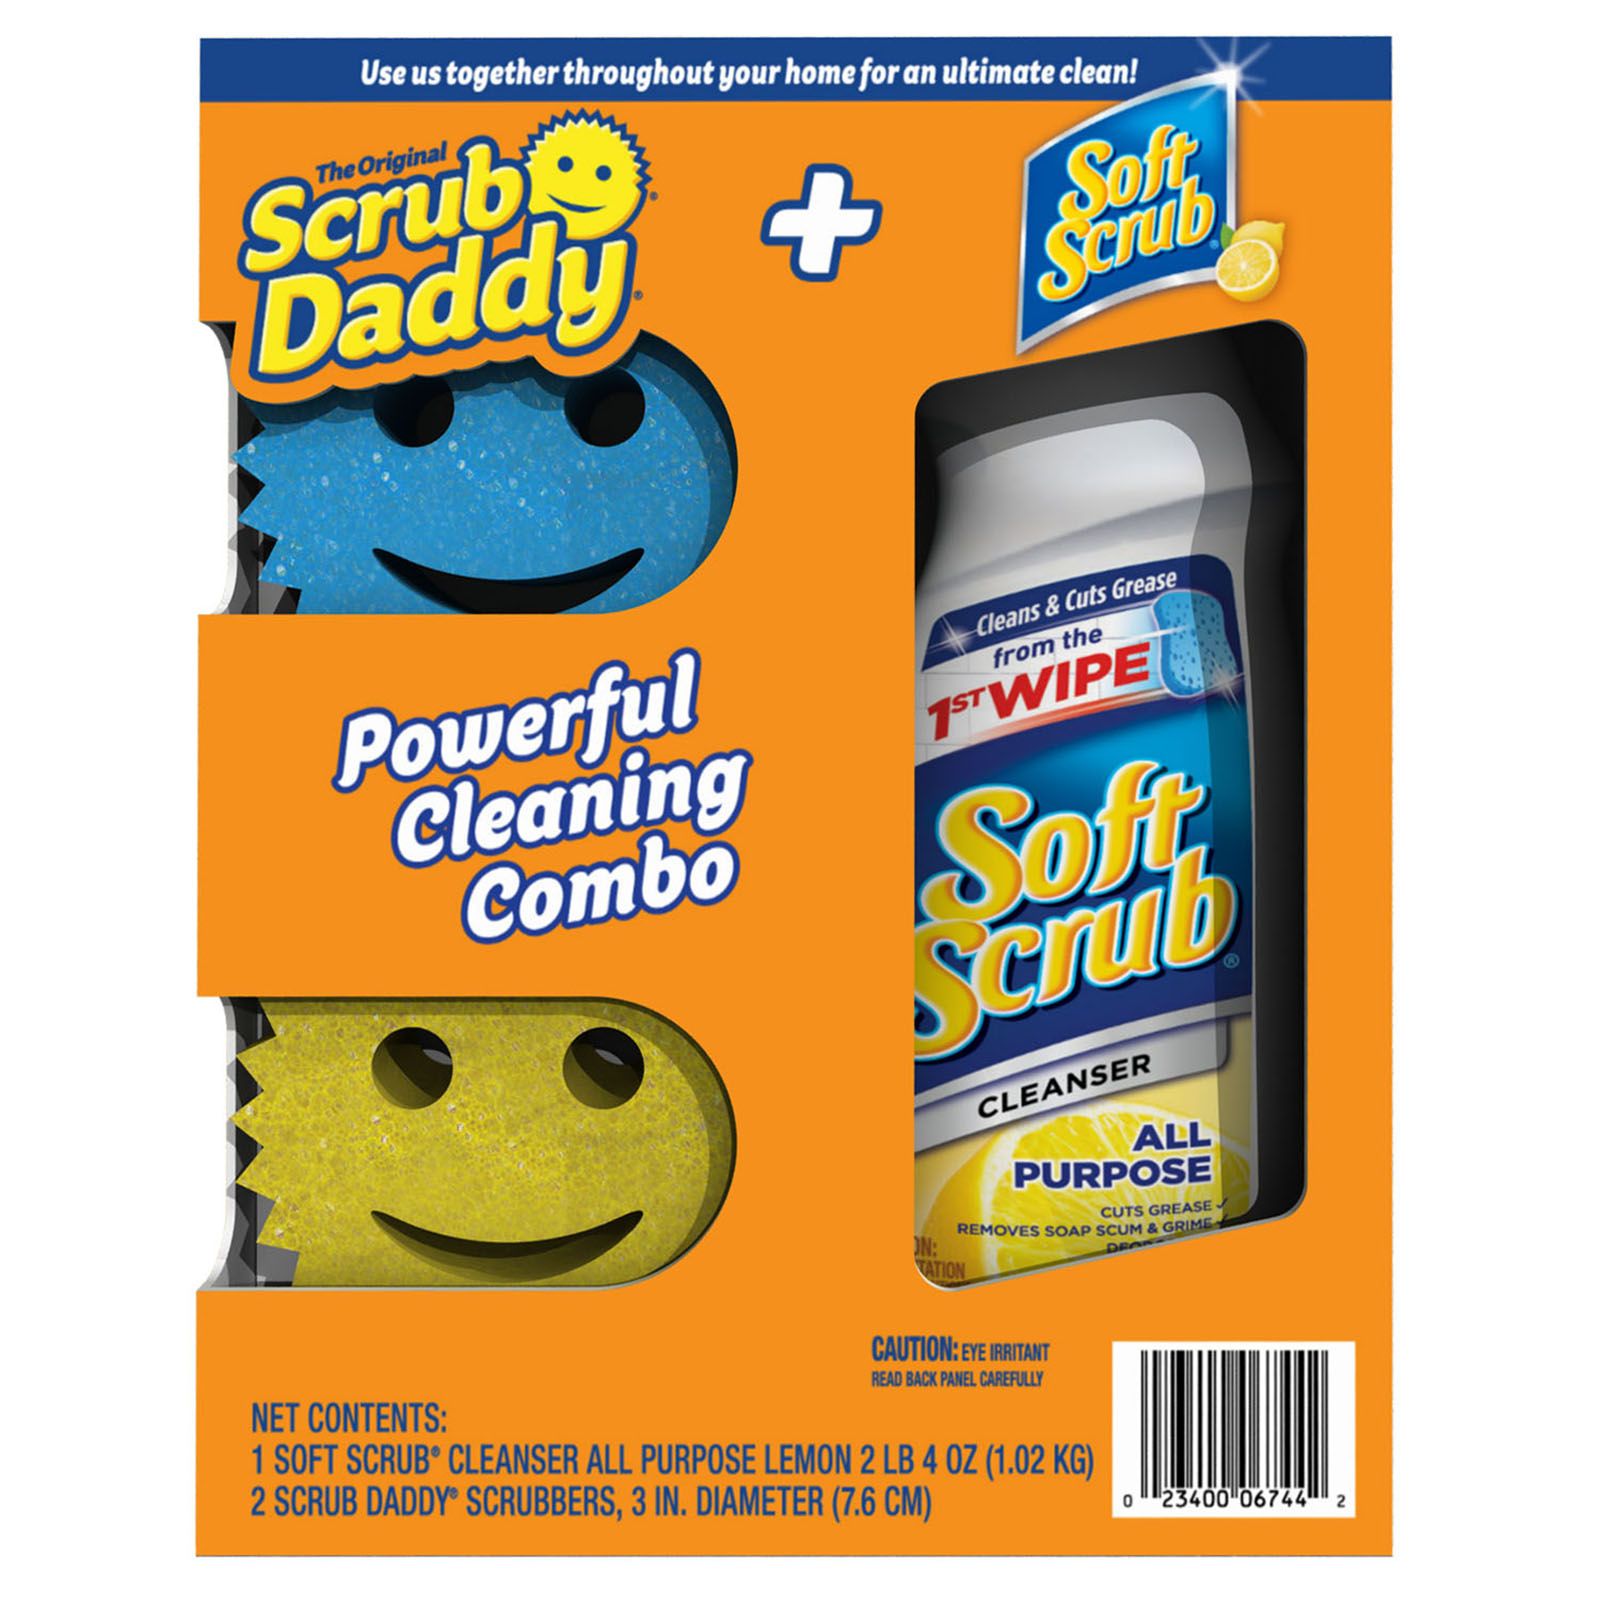 Scrub Daddy: What to know about the popular cleaning brand